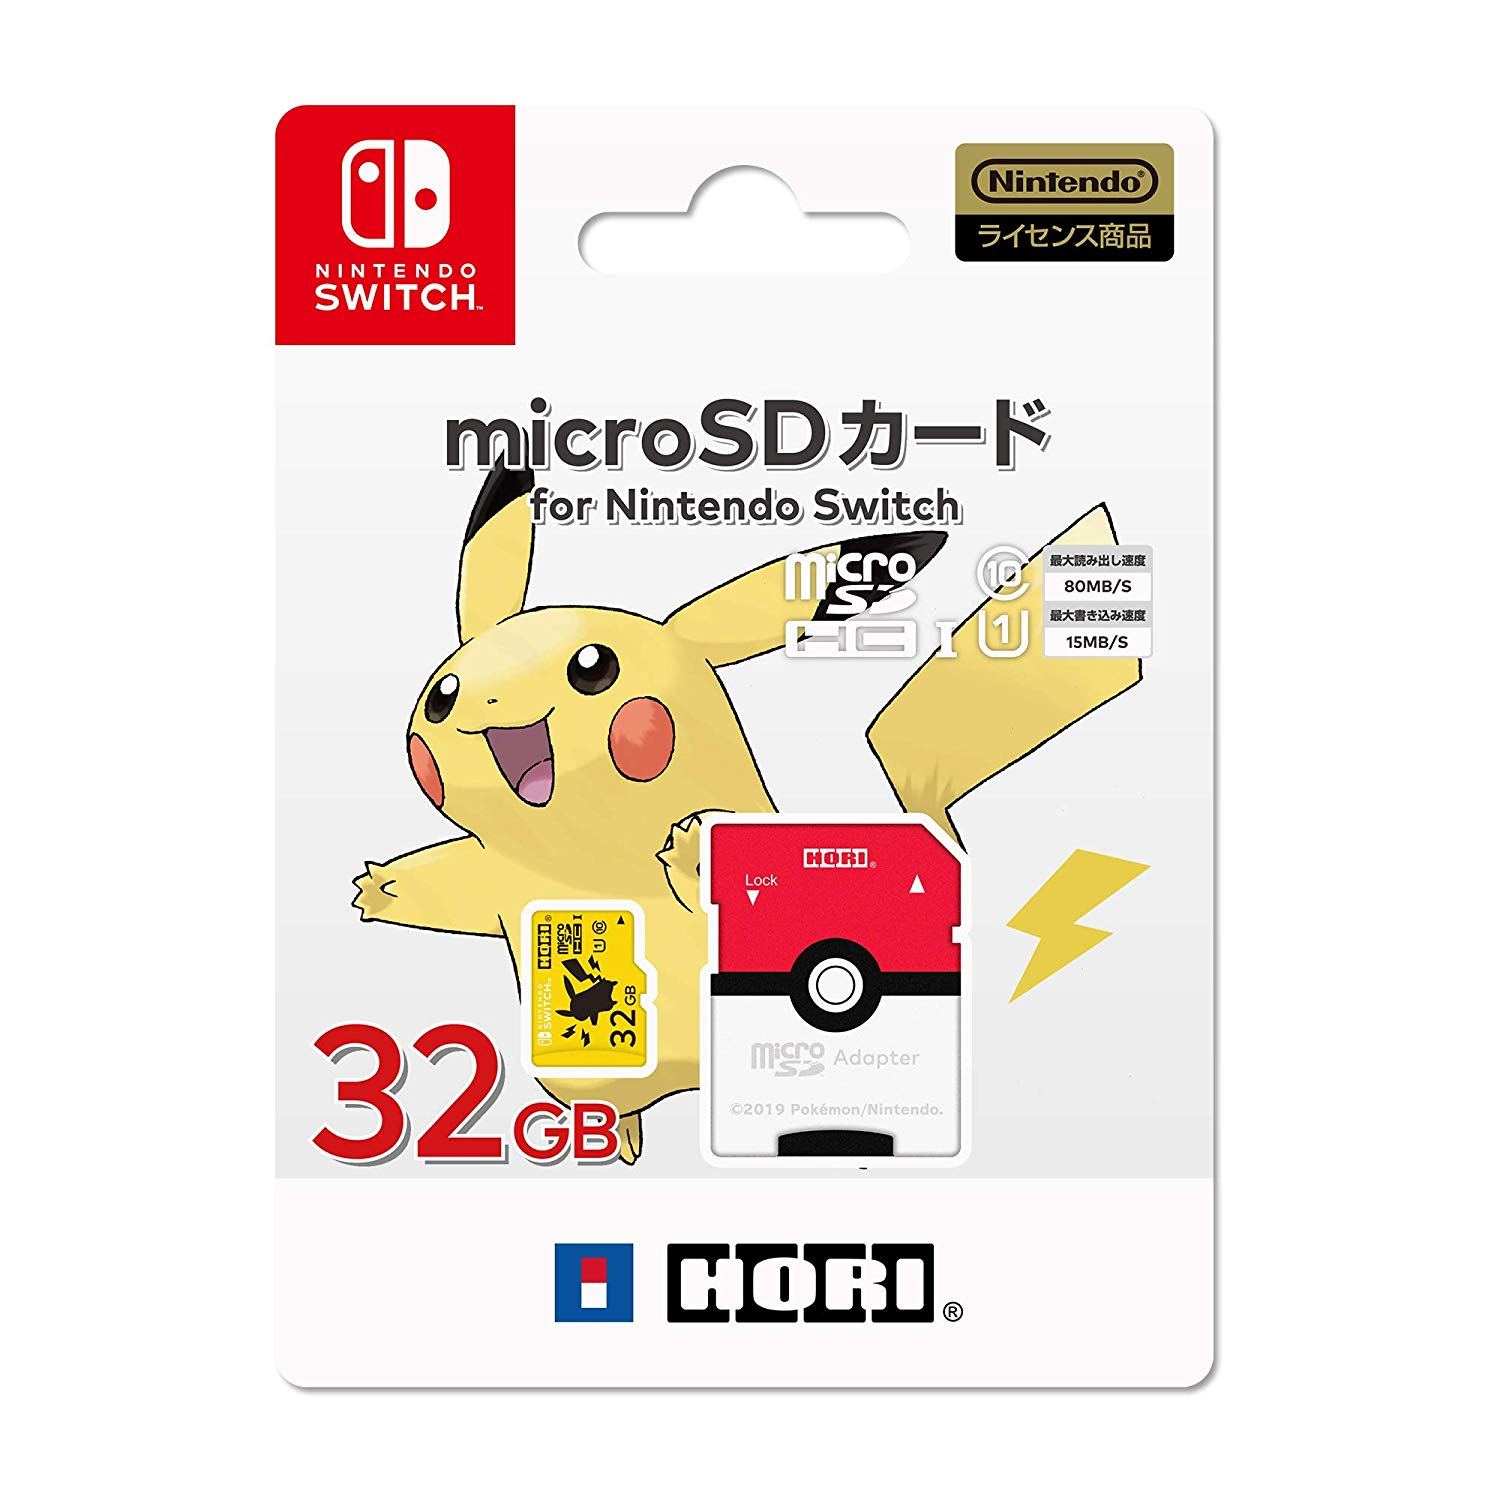 Micro SD Card for Nintendo Switch 32 GB (Pikachu) for Switch